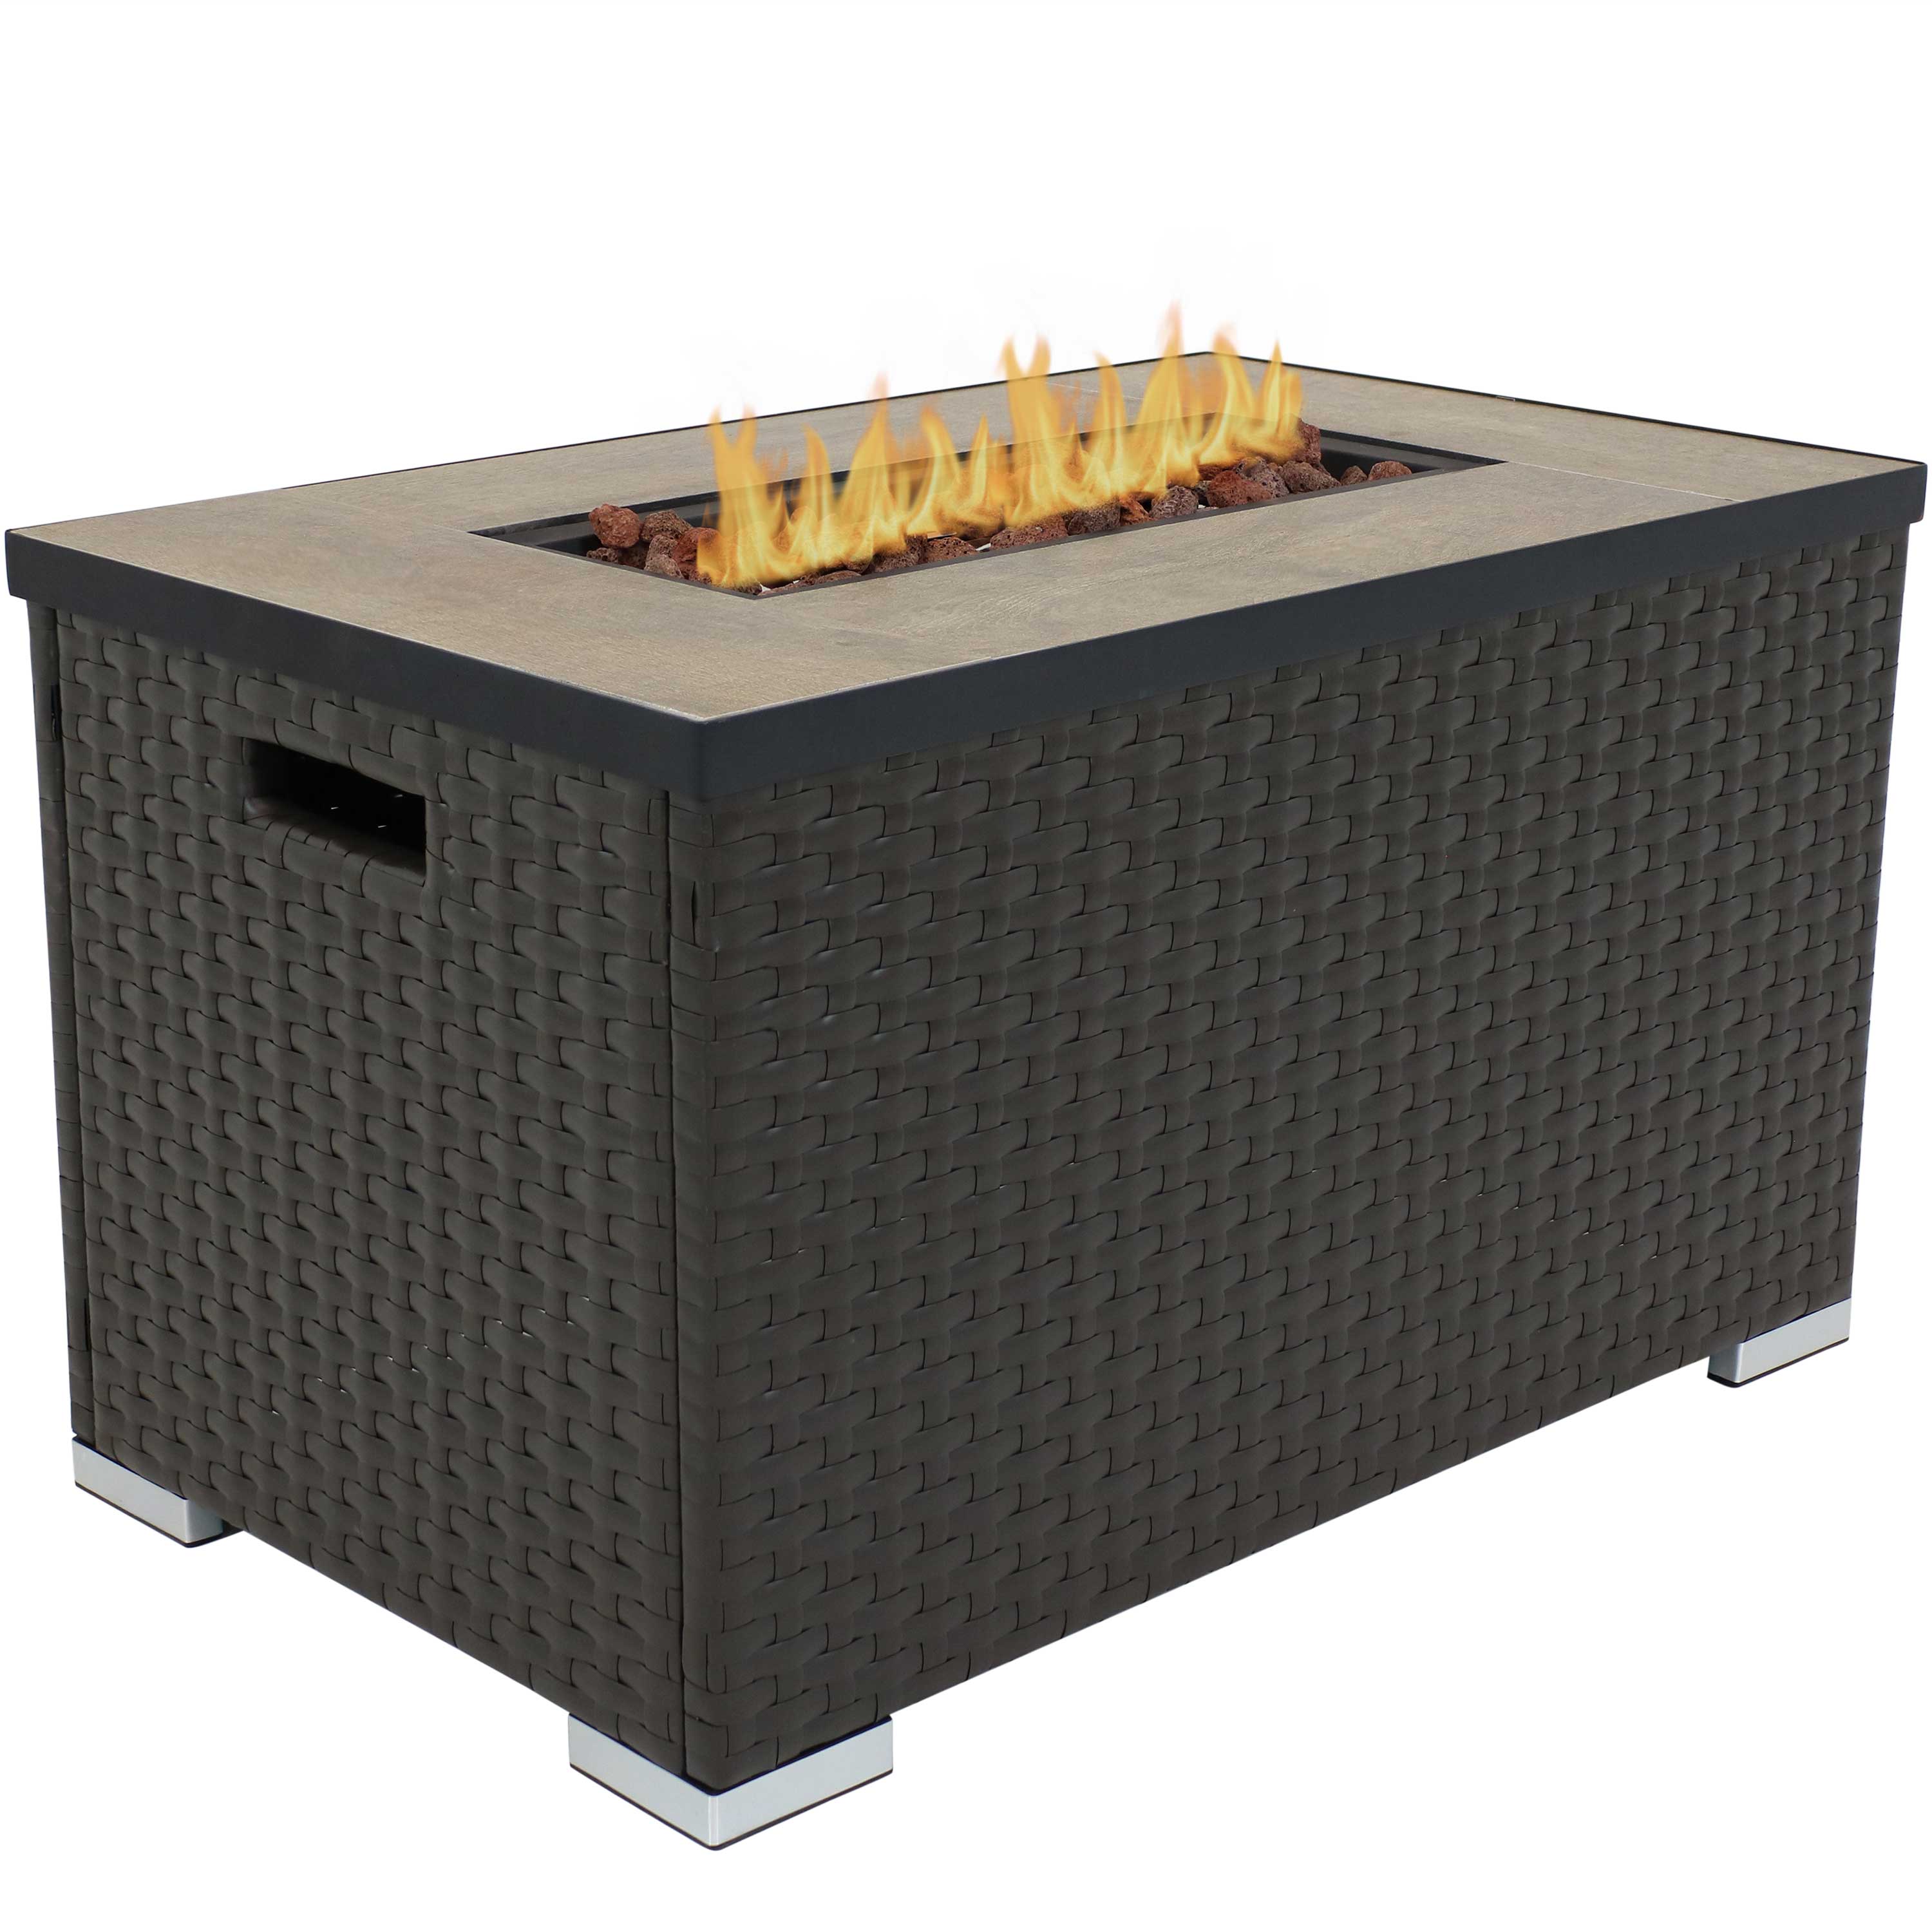 Gas Fire Pits Department At, Wicker Gas Fire Pit